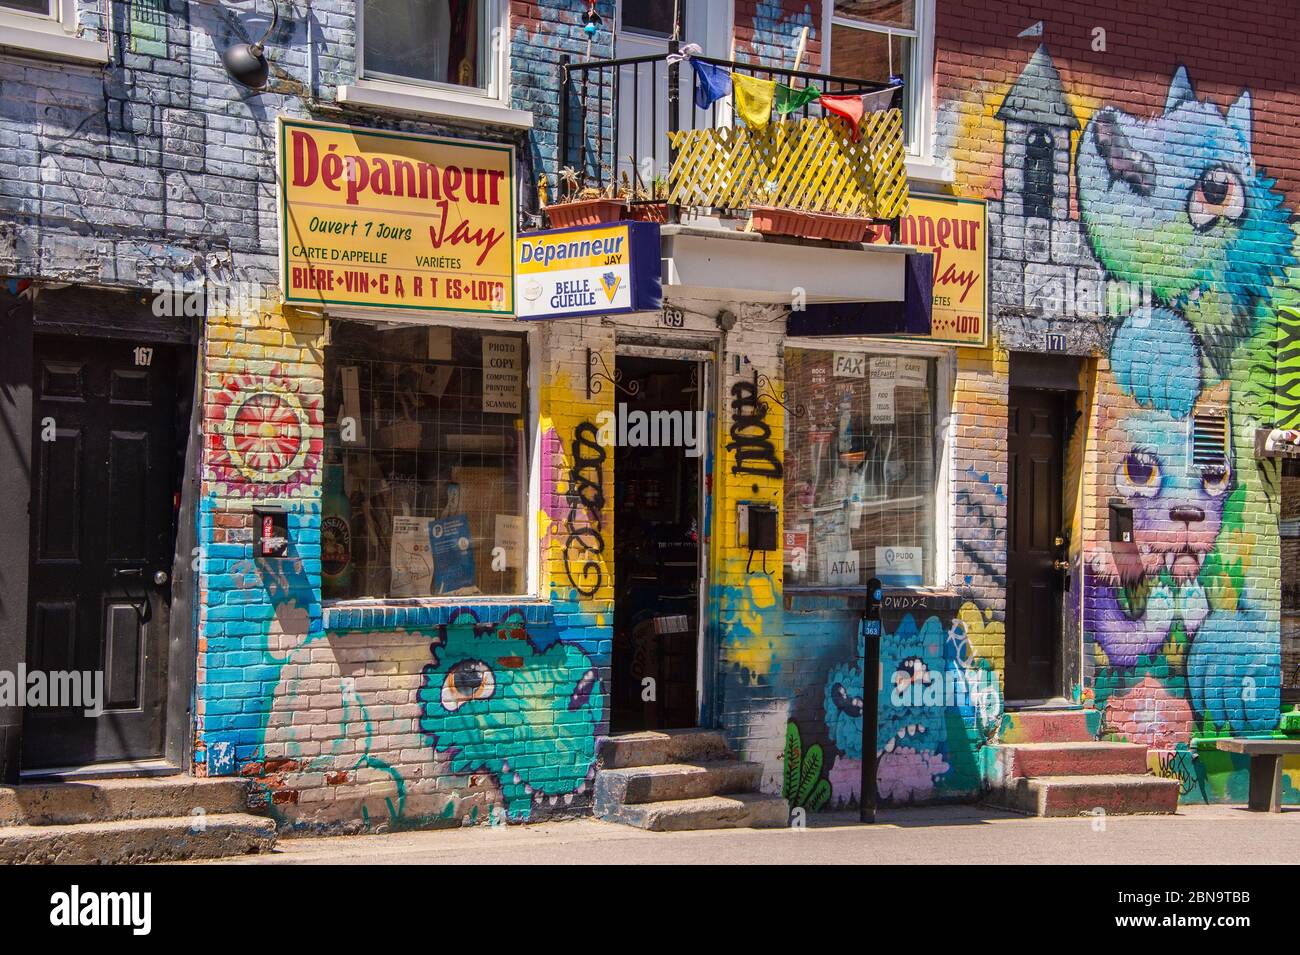 Montreal, CA - 27 April 2020: Facade of Jay Depanneur convenience store on Duluth street. Stock Photo